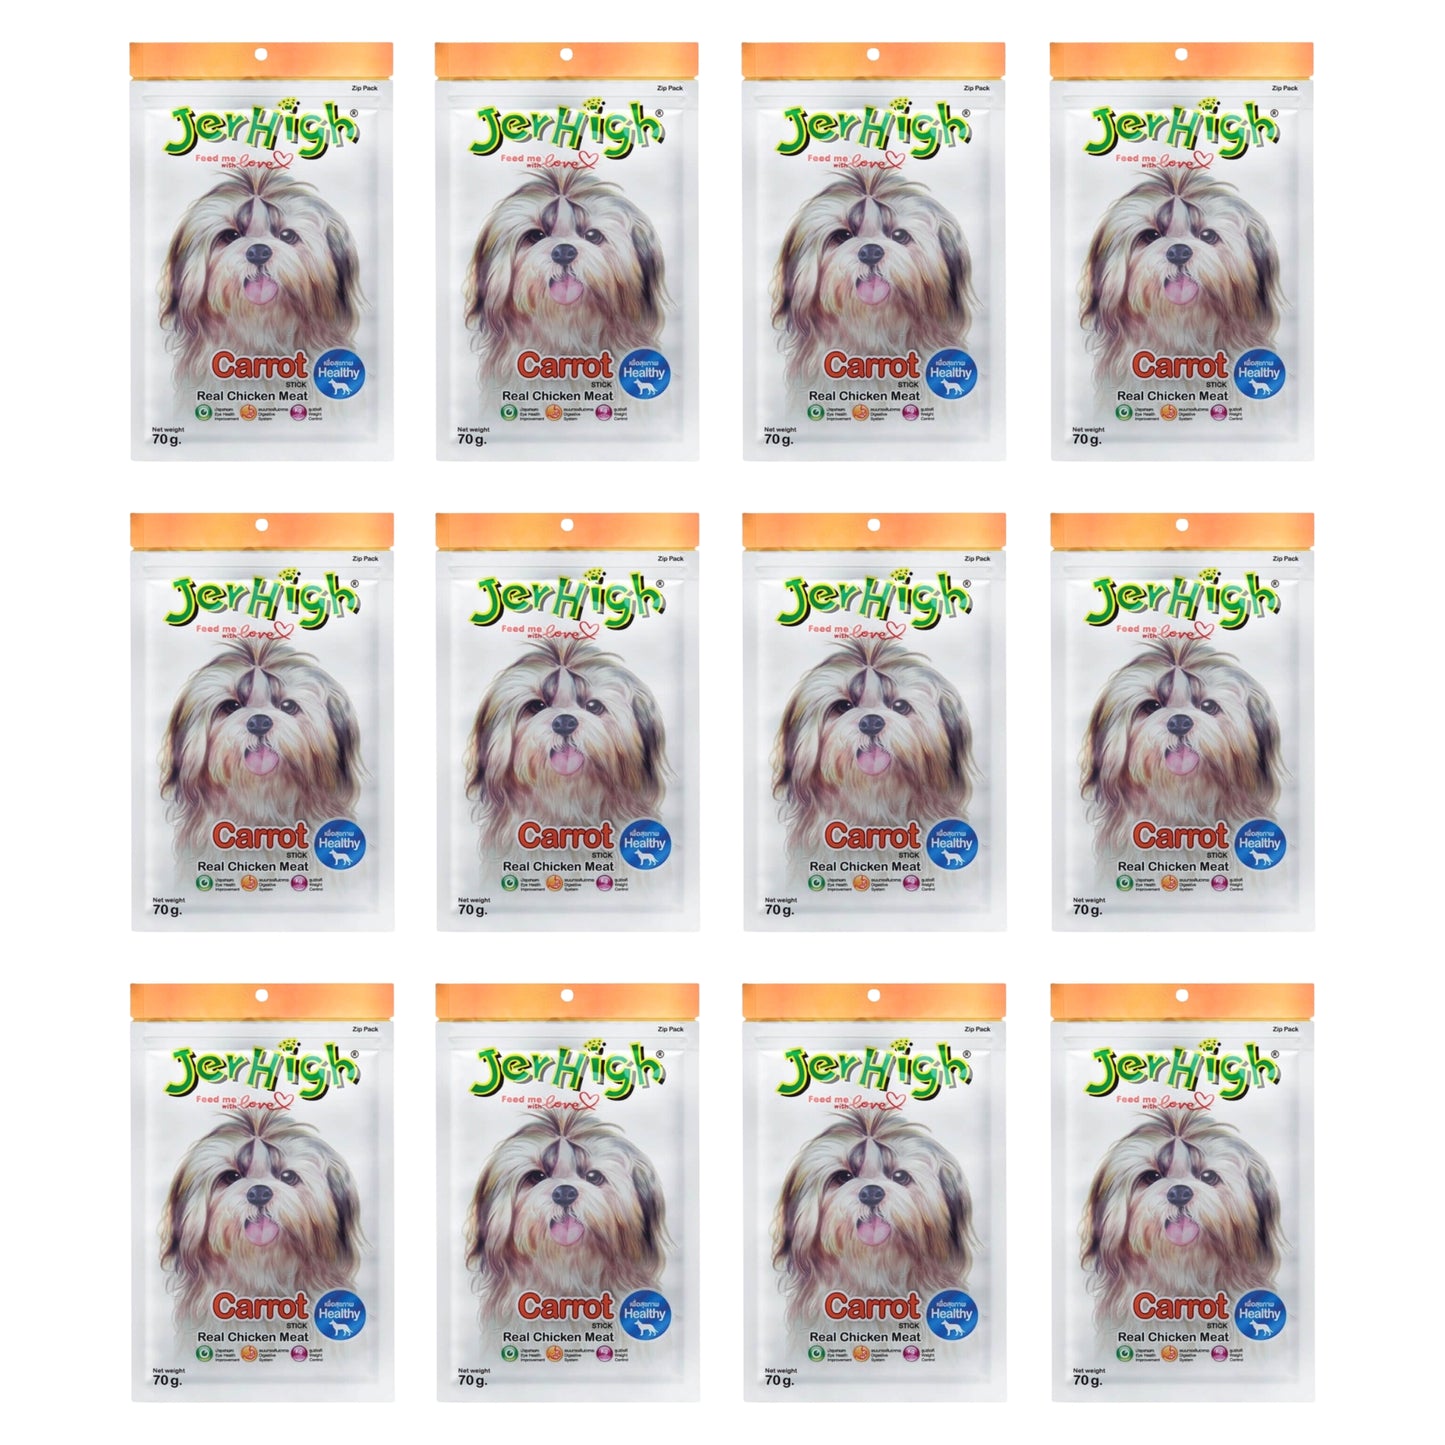 JerHigh Carrot Stick Dog Treat with Real Chicken Meat - 70g, Pack of 12